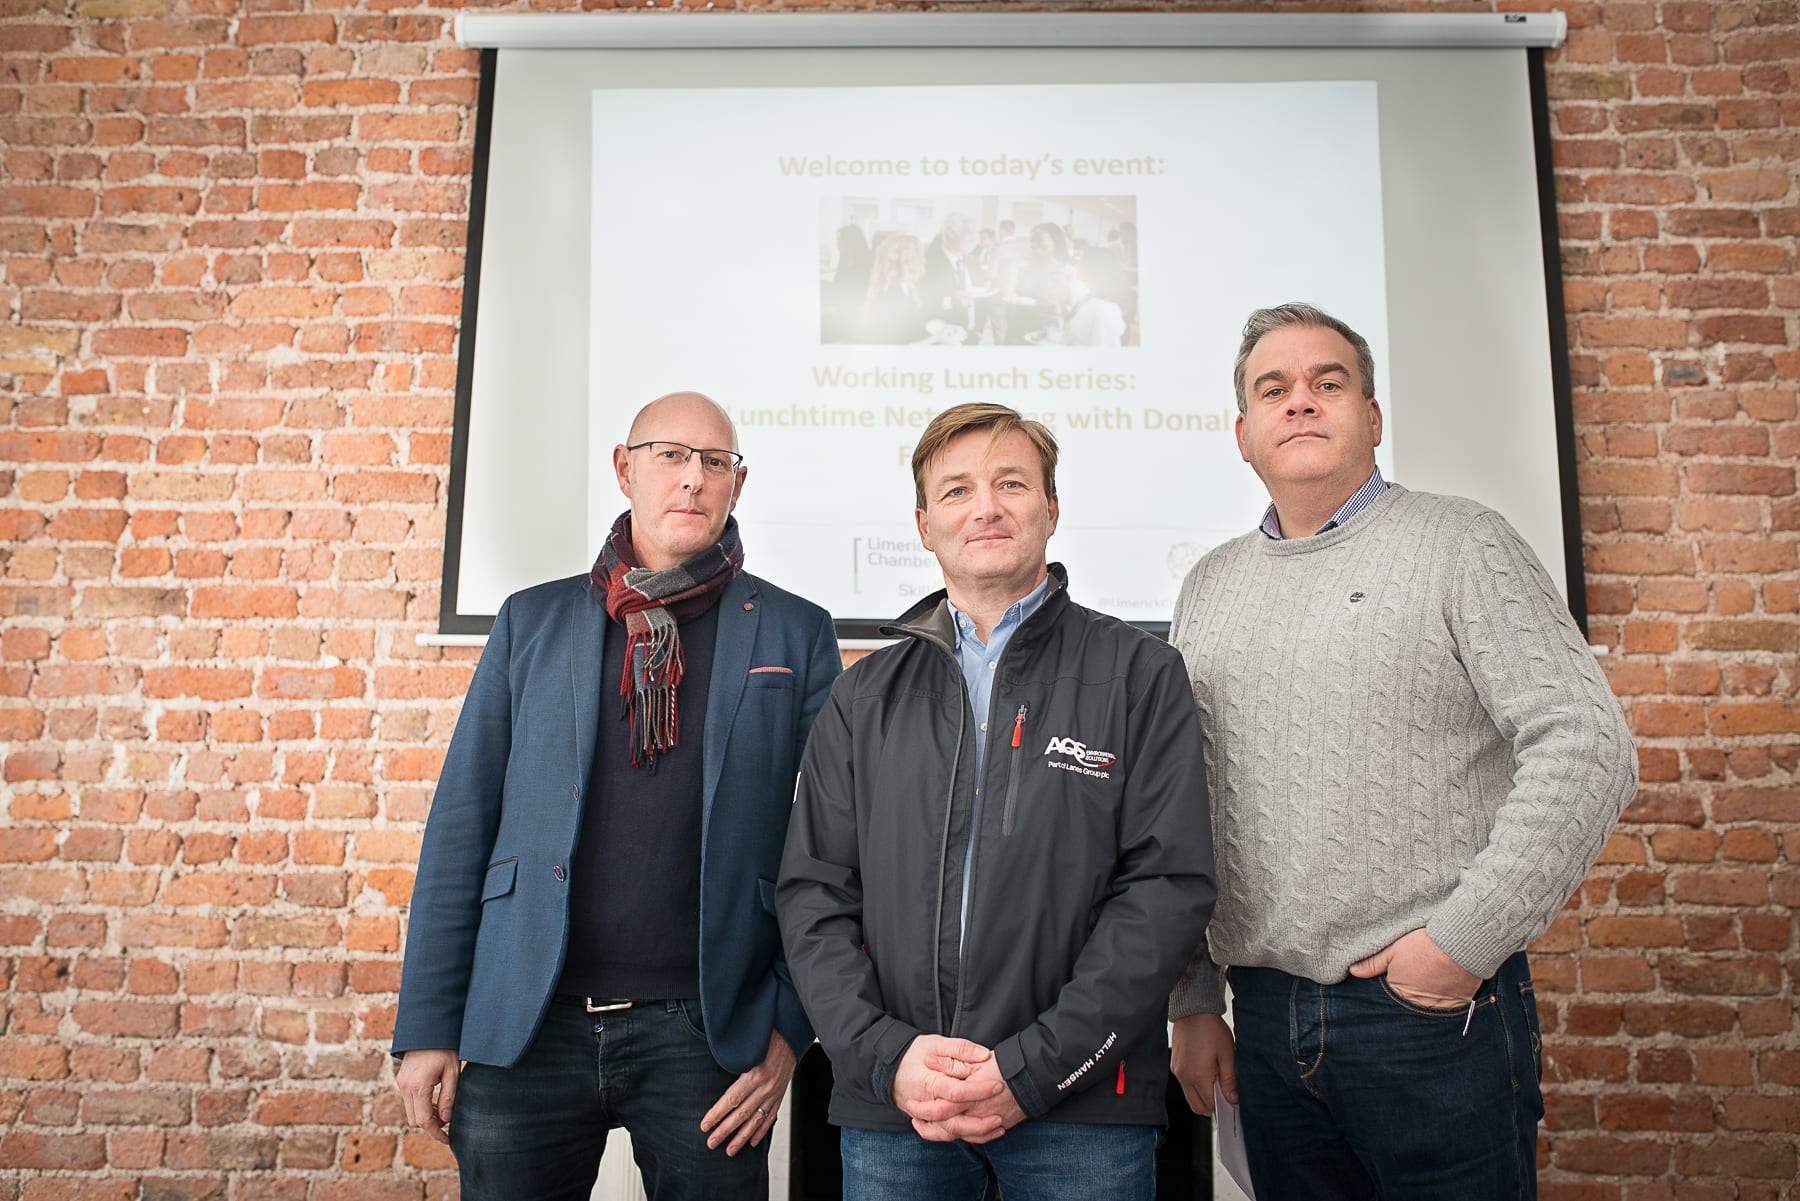 At the Limerick Chamber Skillnet Working Lunchtime Networking with Donal Fitzgibbon was From left to right: Michael O’Connor - Praxis Architecture, Michael O’Regan - AQS Environmental Solutions, Noel Gavin - Northern Trust. 
Image by Morning Star Photography